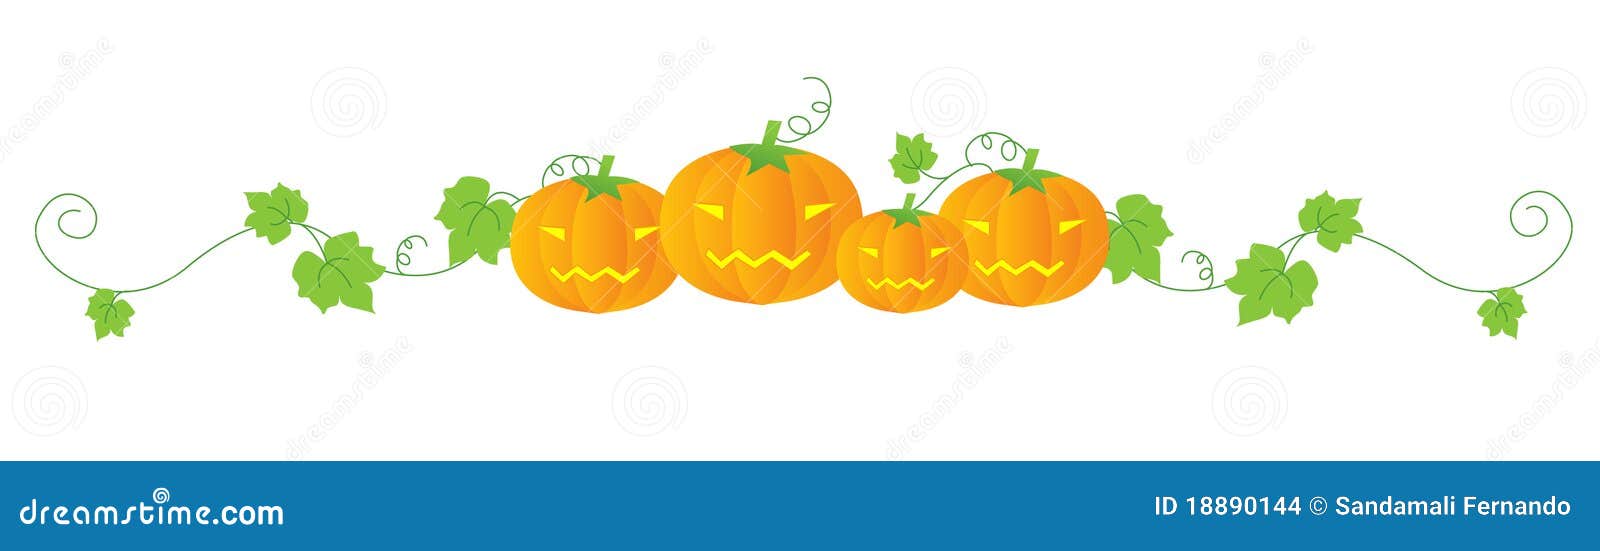 Halloween divider. Colorful pumpkins halloween illustration isolated on white background